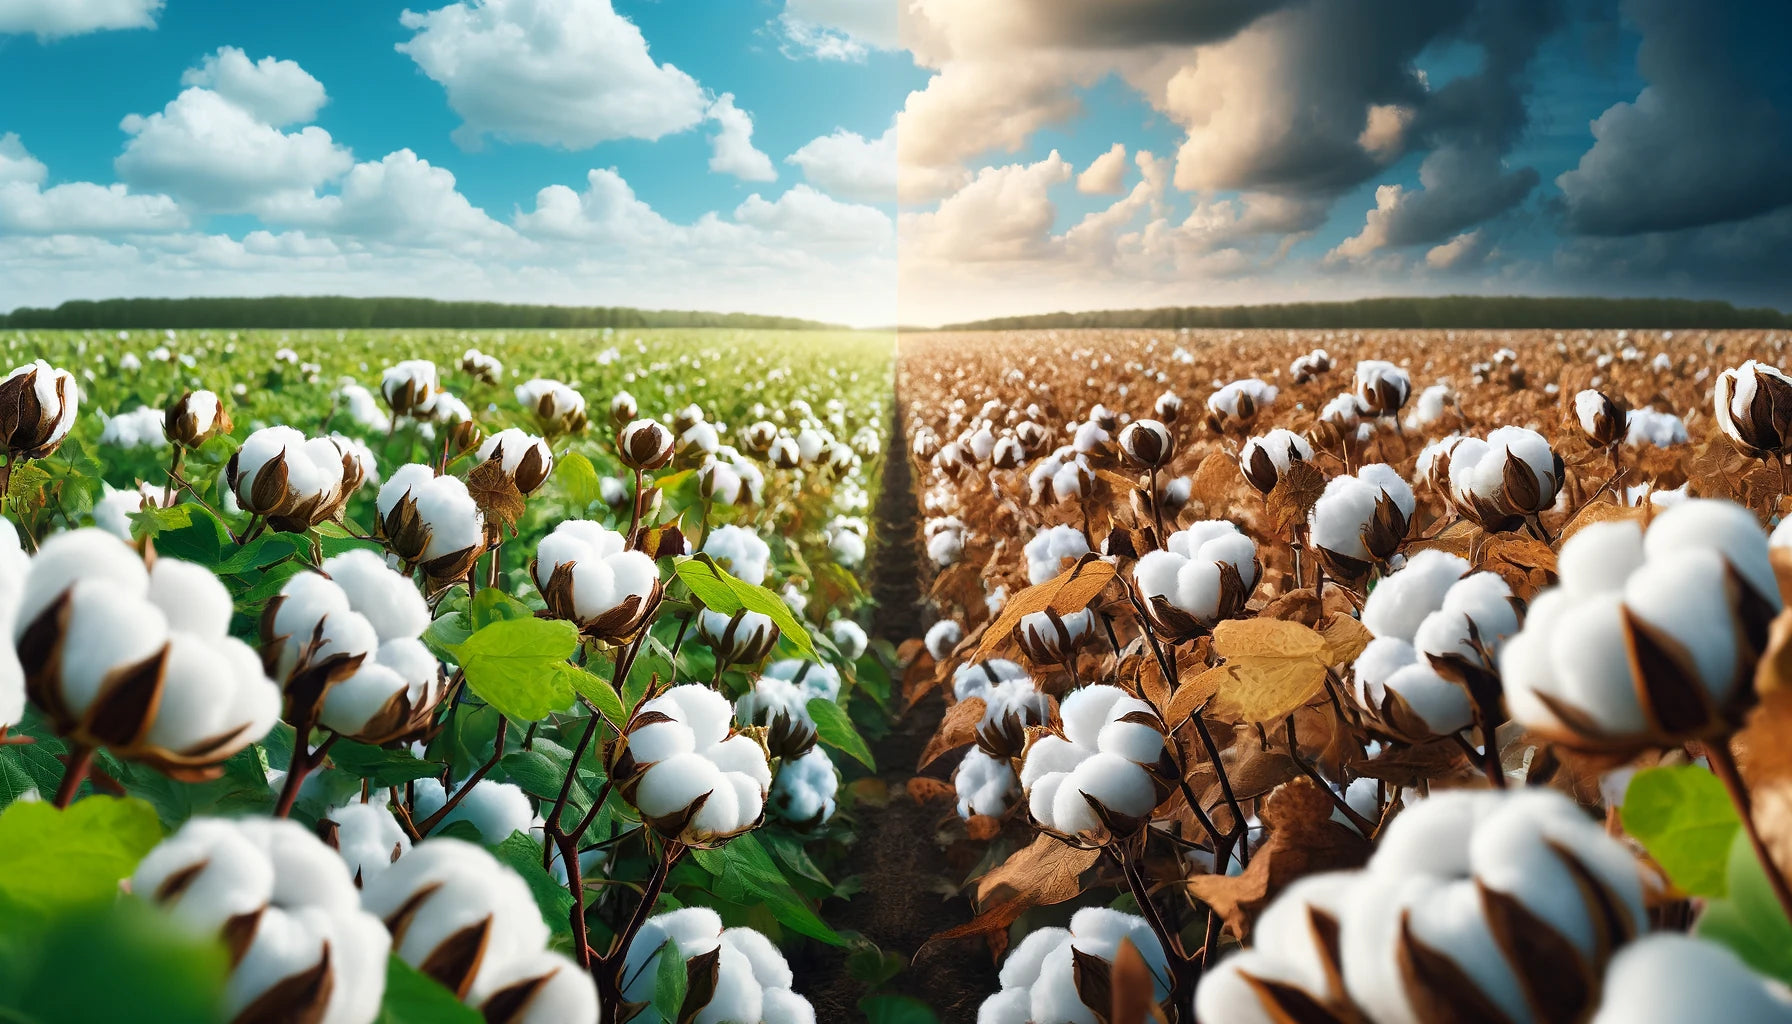 Difference Between Organic Cotton and Non-Organic Cotton